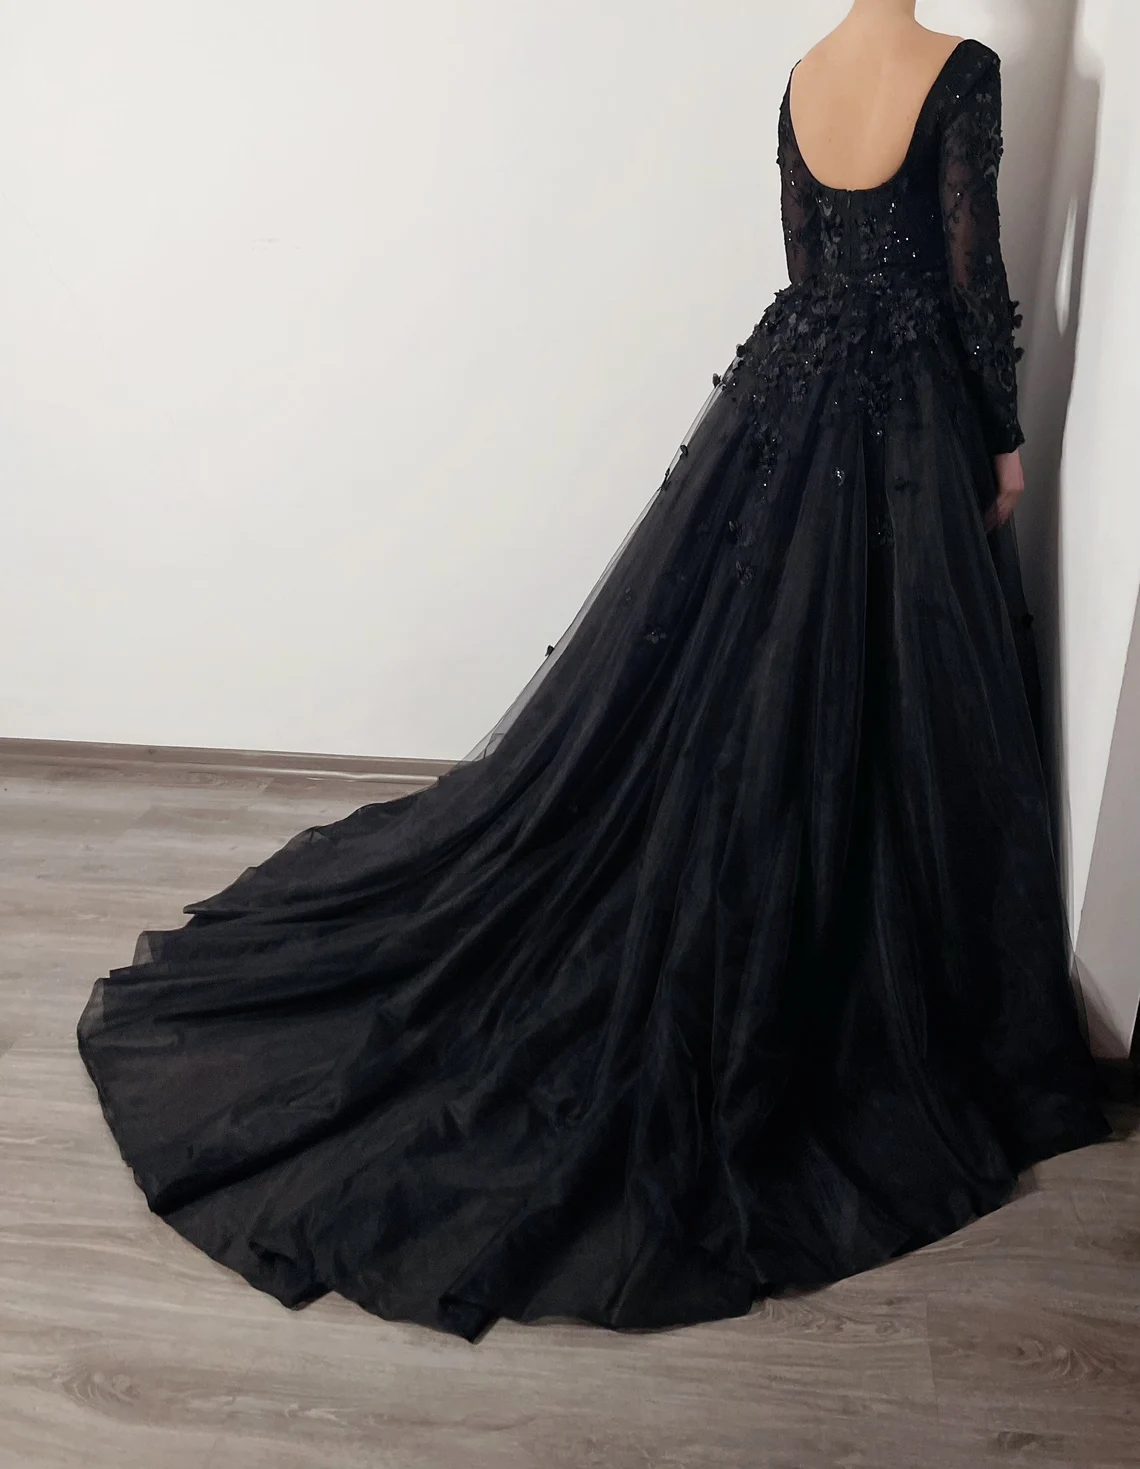 Black Gothic elegant 3D floral beaded wedding dress, open back train tulle gown,DS9580